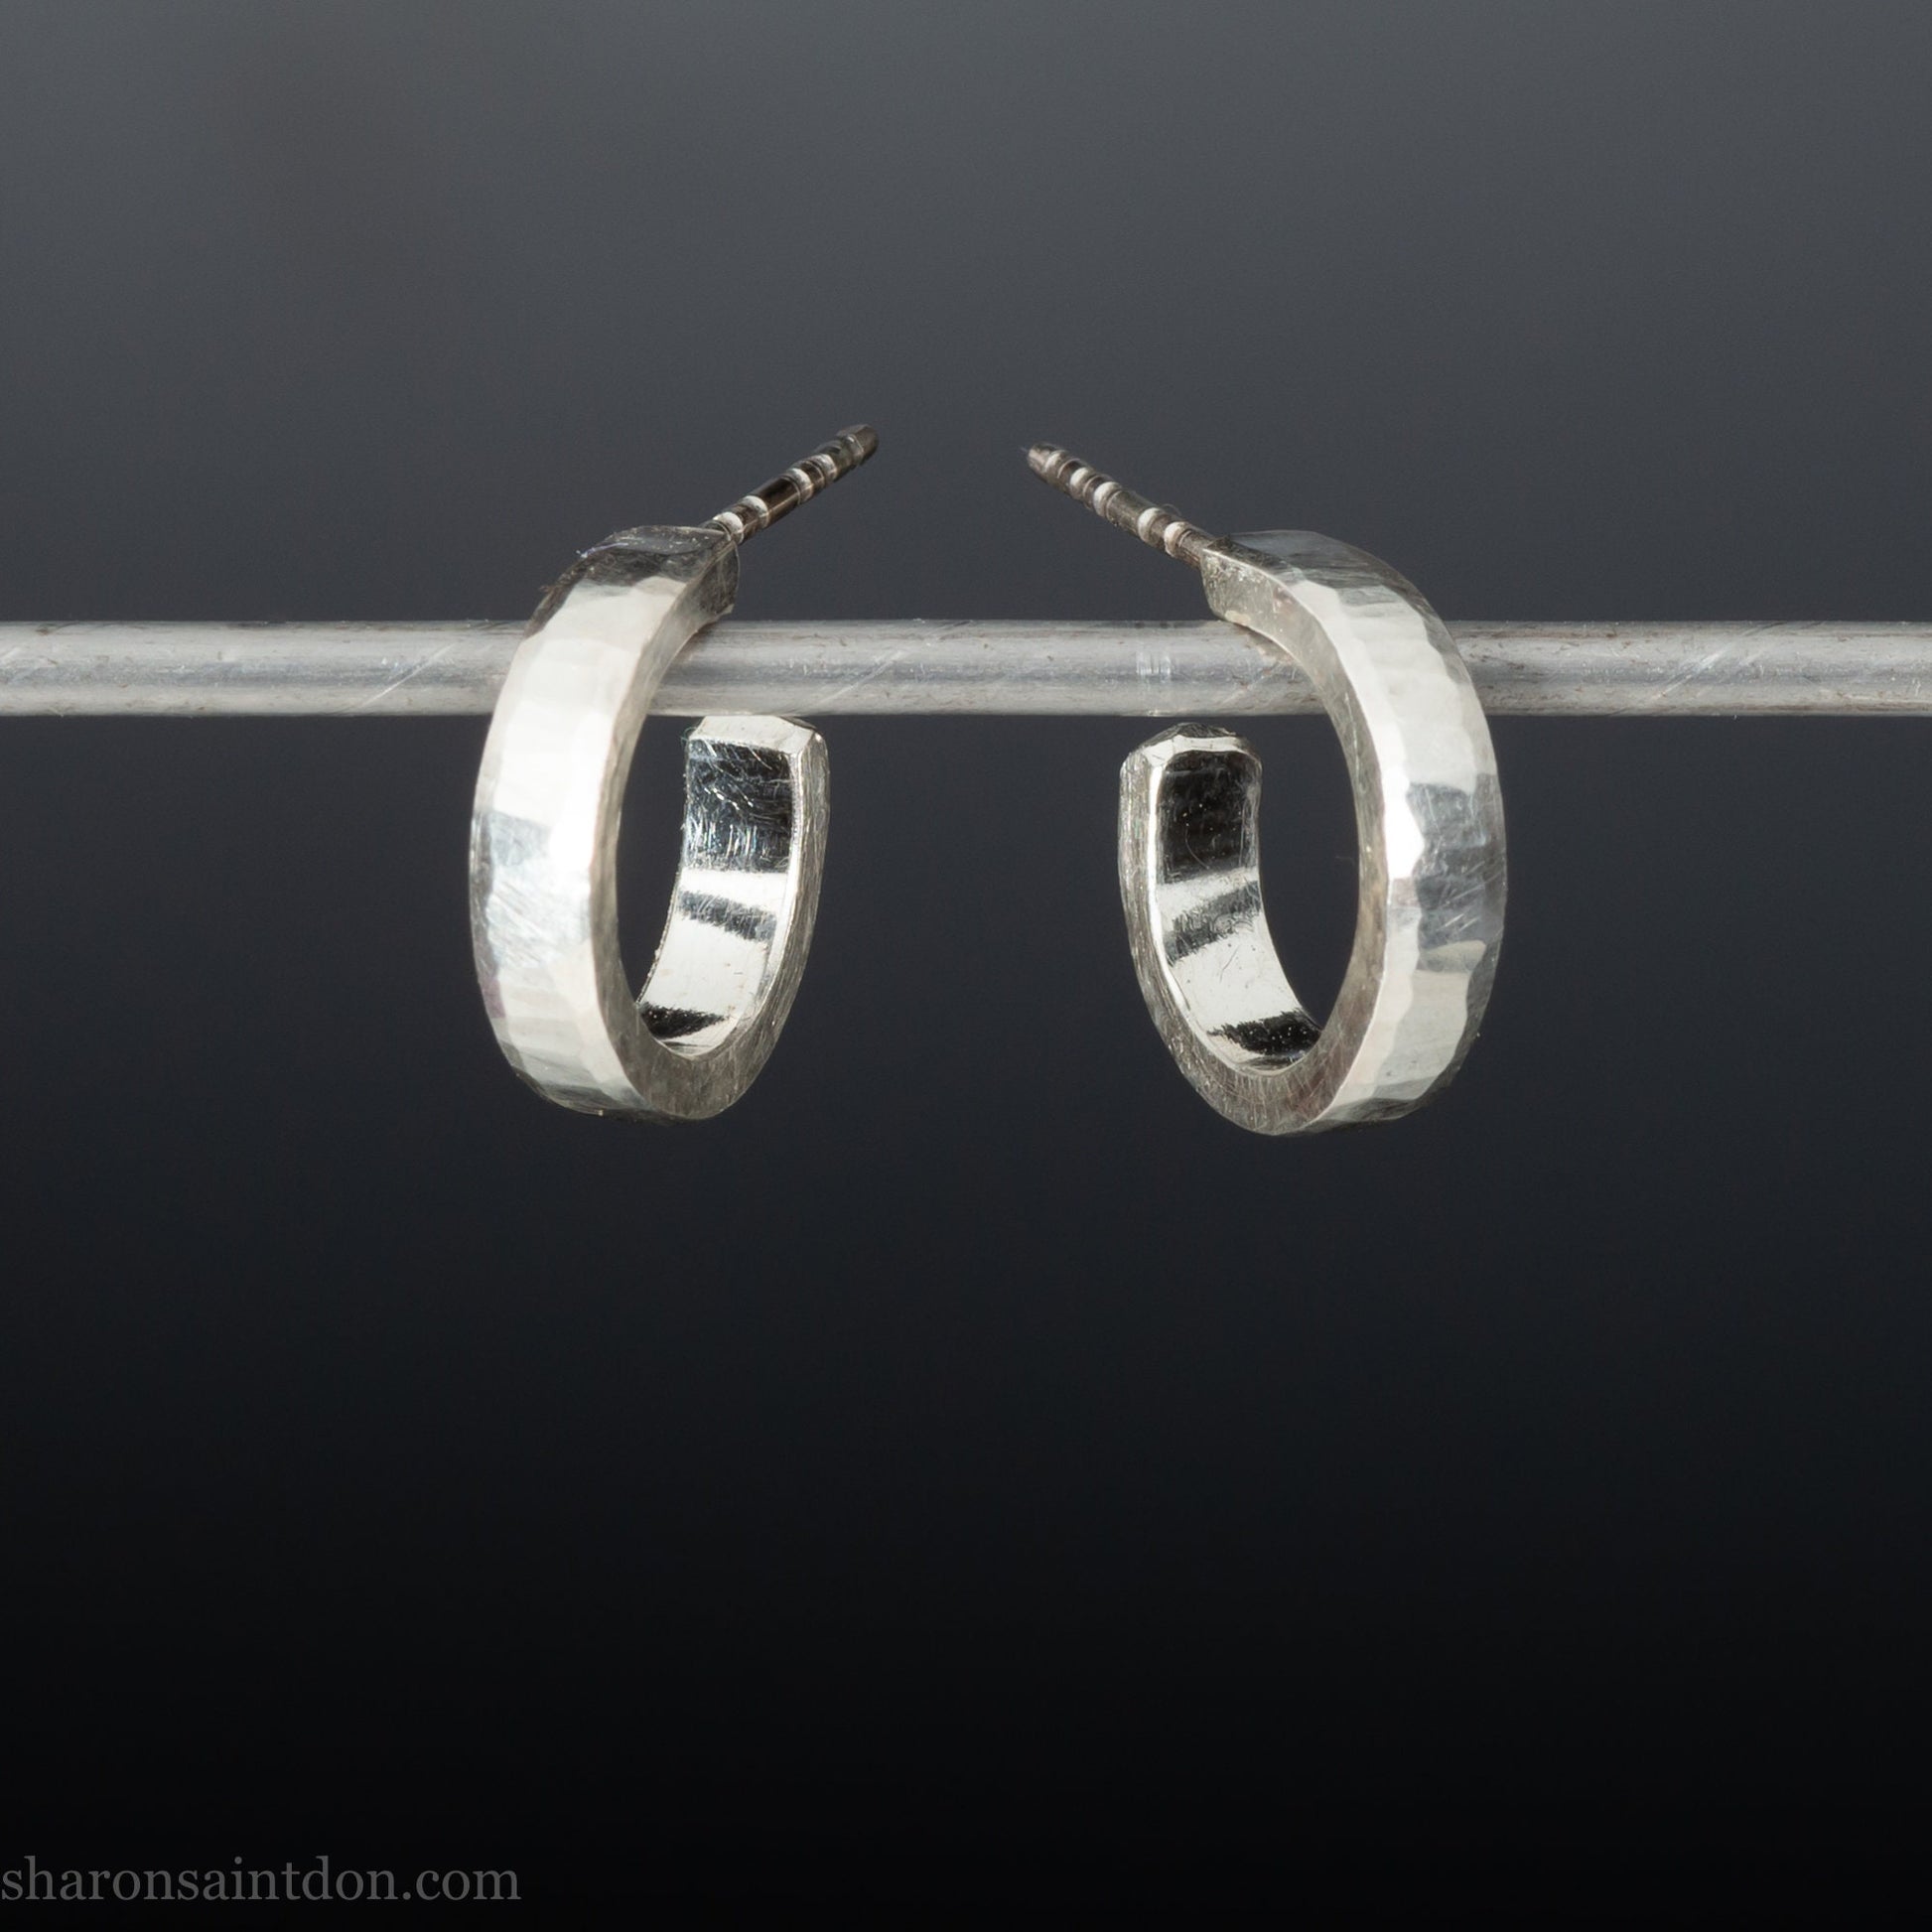 925 sterling silver hoop earrings for men or women handmade by Sharon SaintDon in the Pacific Northwest of North America. 16mm x 3mm, hammered, shiny.